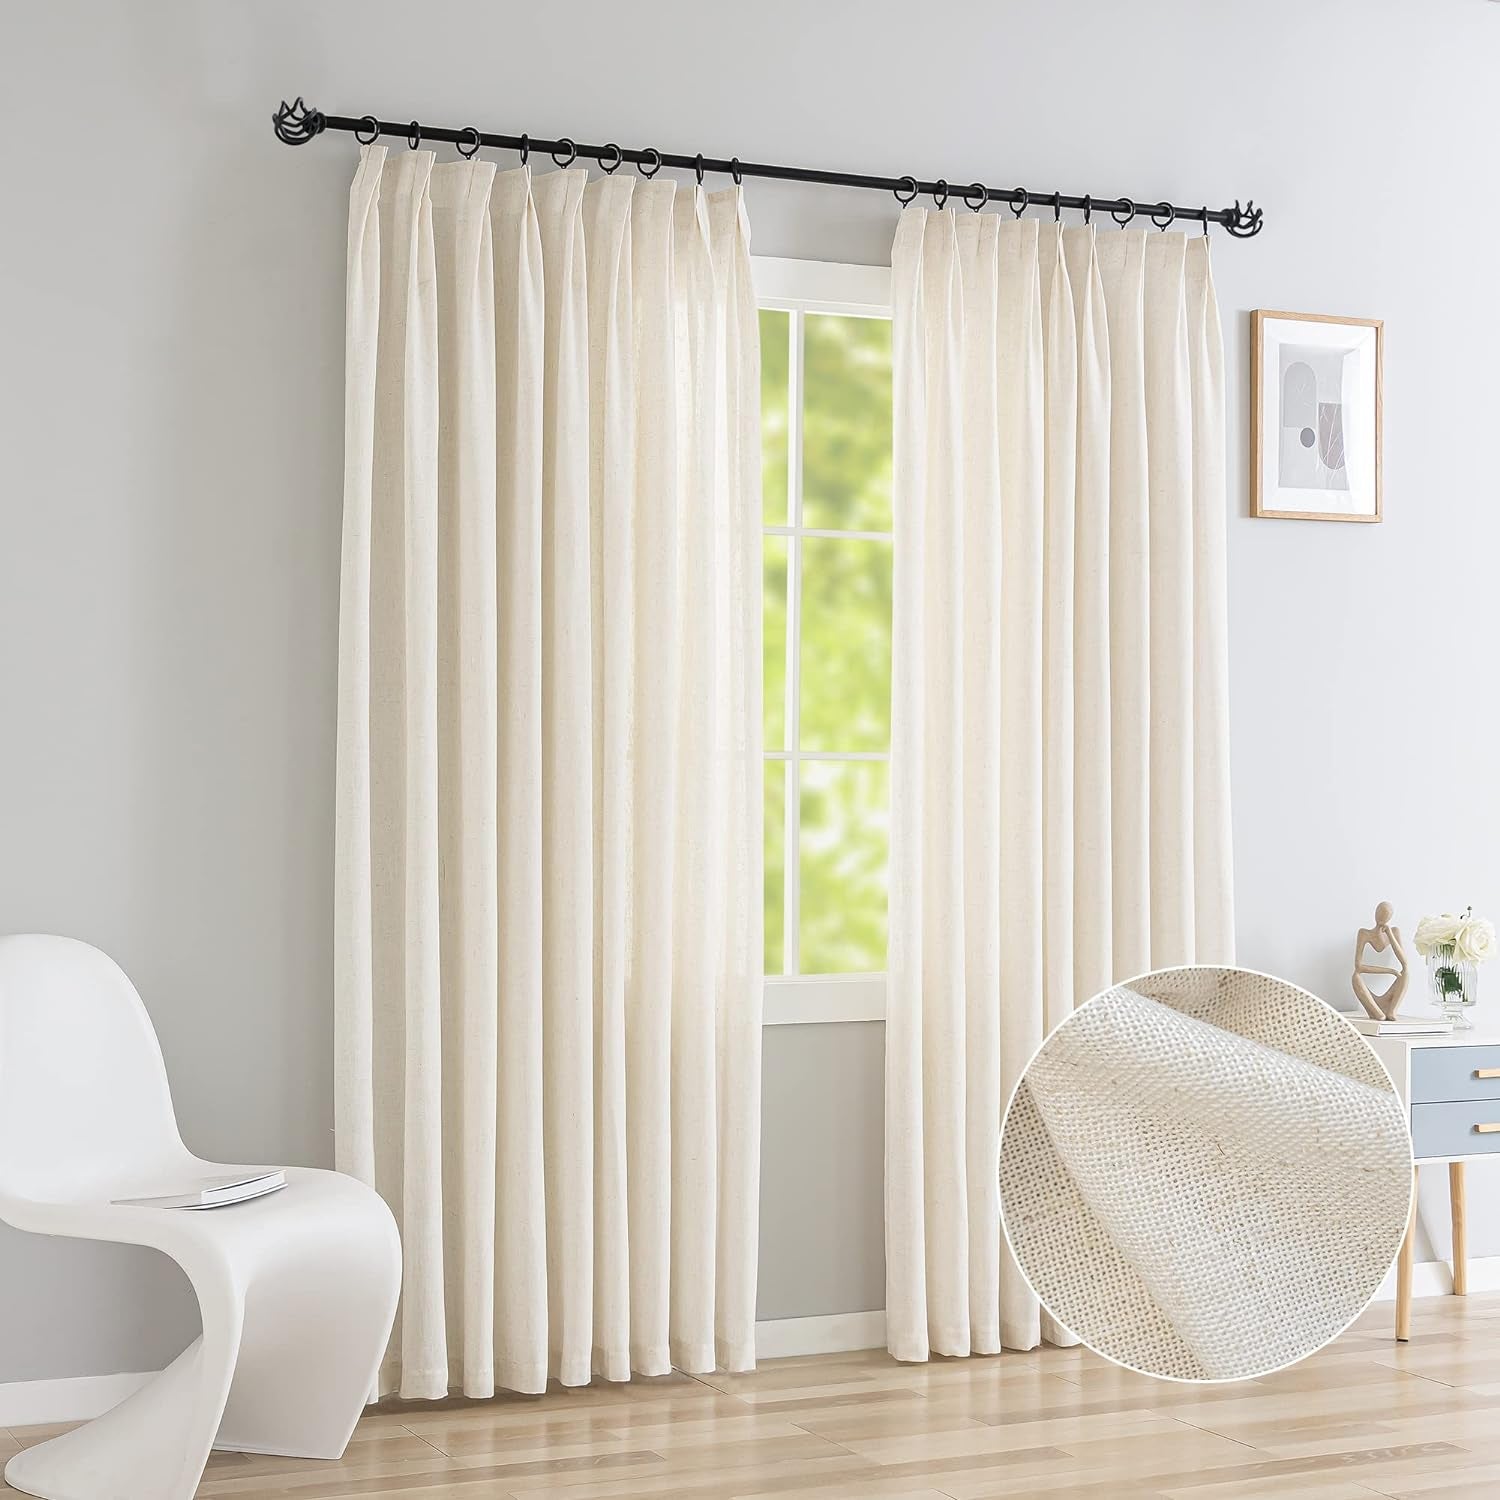 OYRING Linen Textured Semi Sheer Curtains, Pinch Pleated Curtains Light Filtering Pinch Pleated Drapes for Home, Hotel, Office, Linen Patio Door Curtain 72 W X 108 L Inch  OYRING   